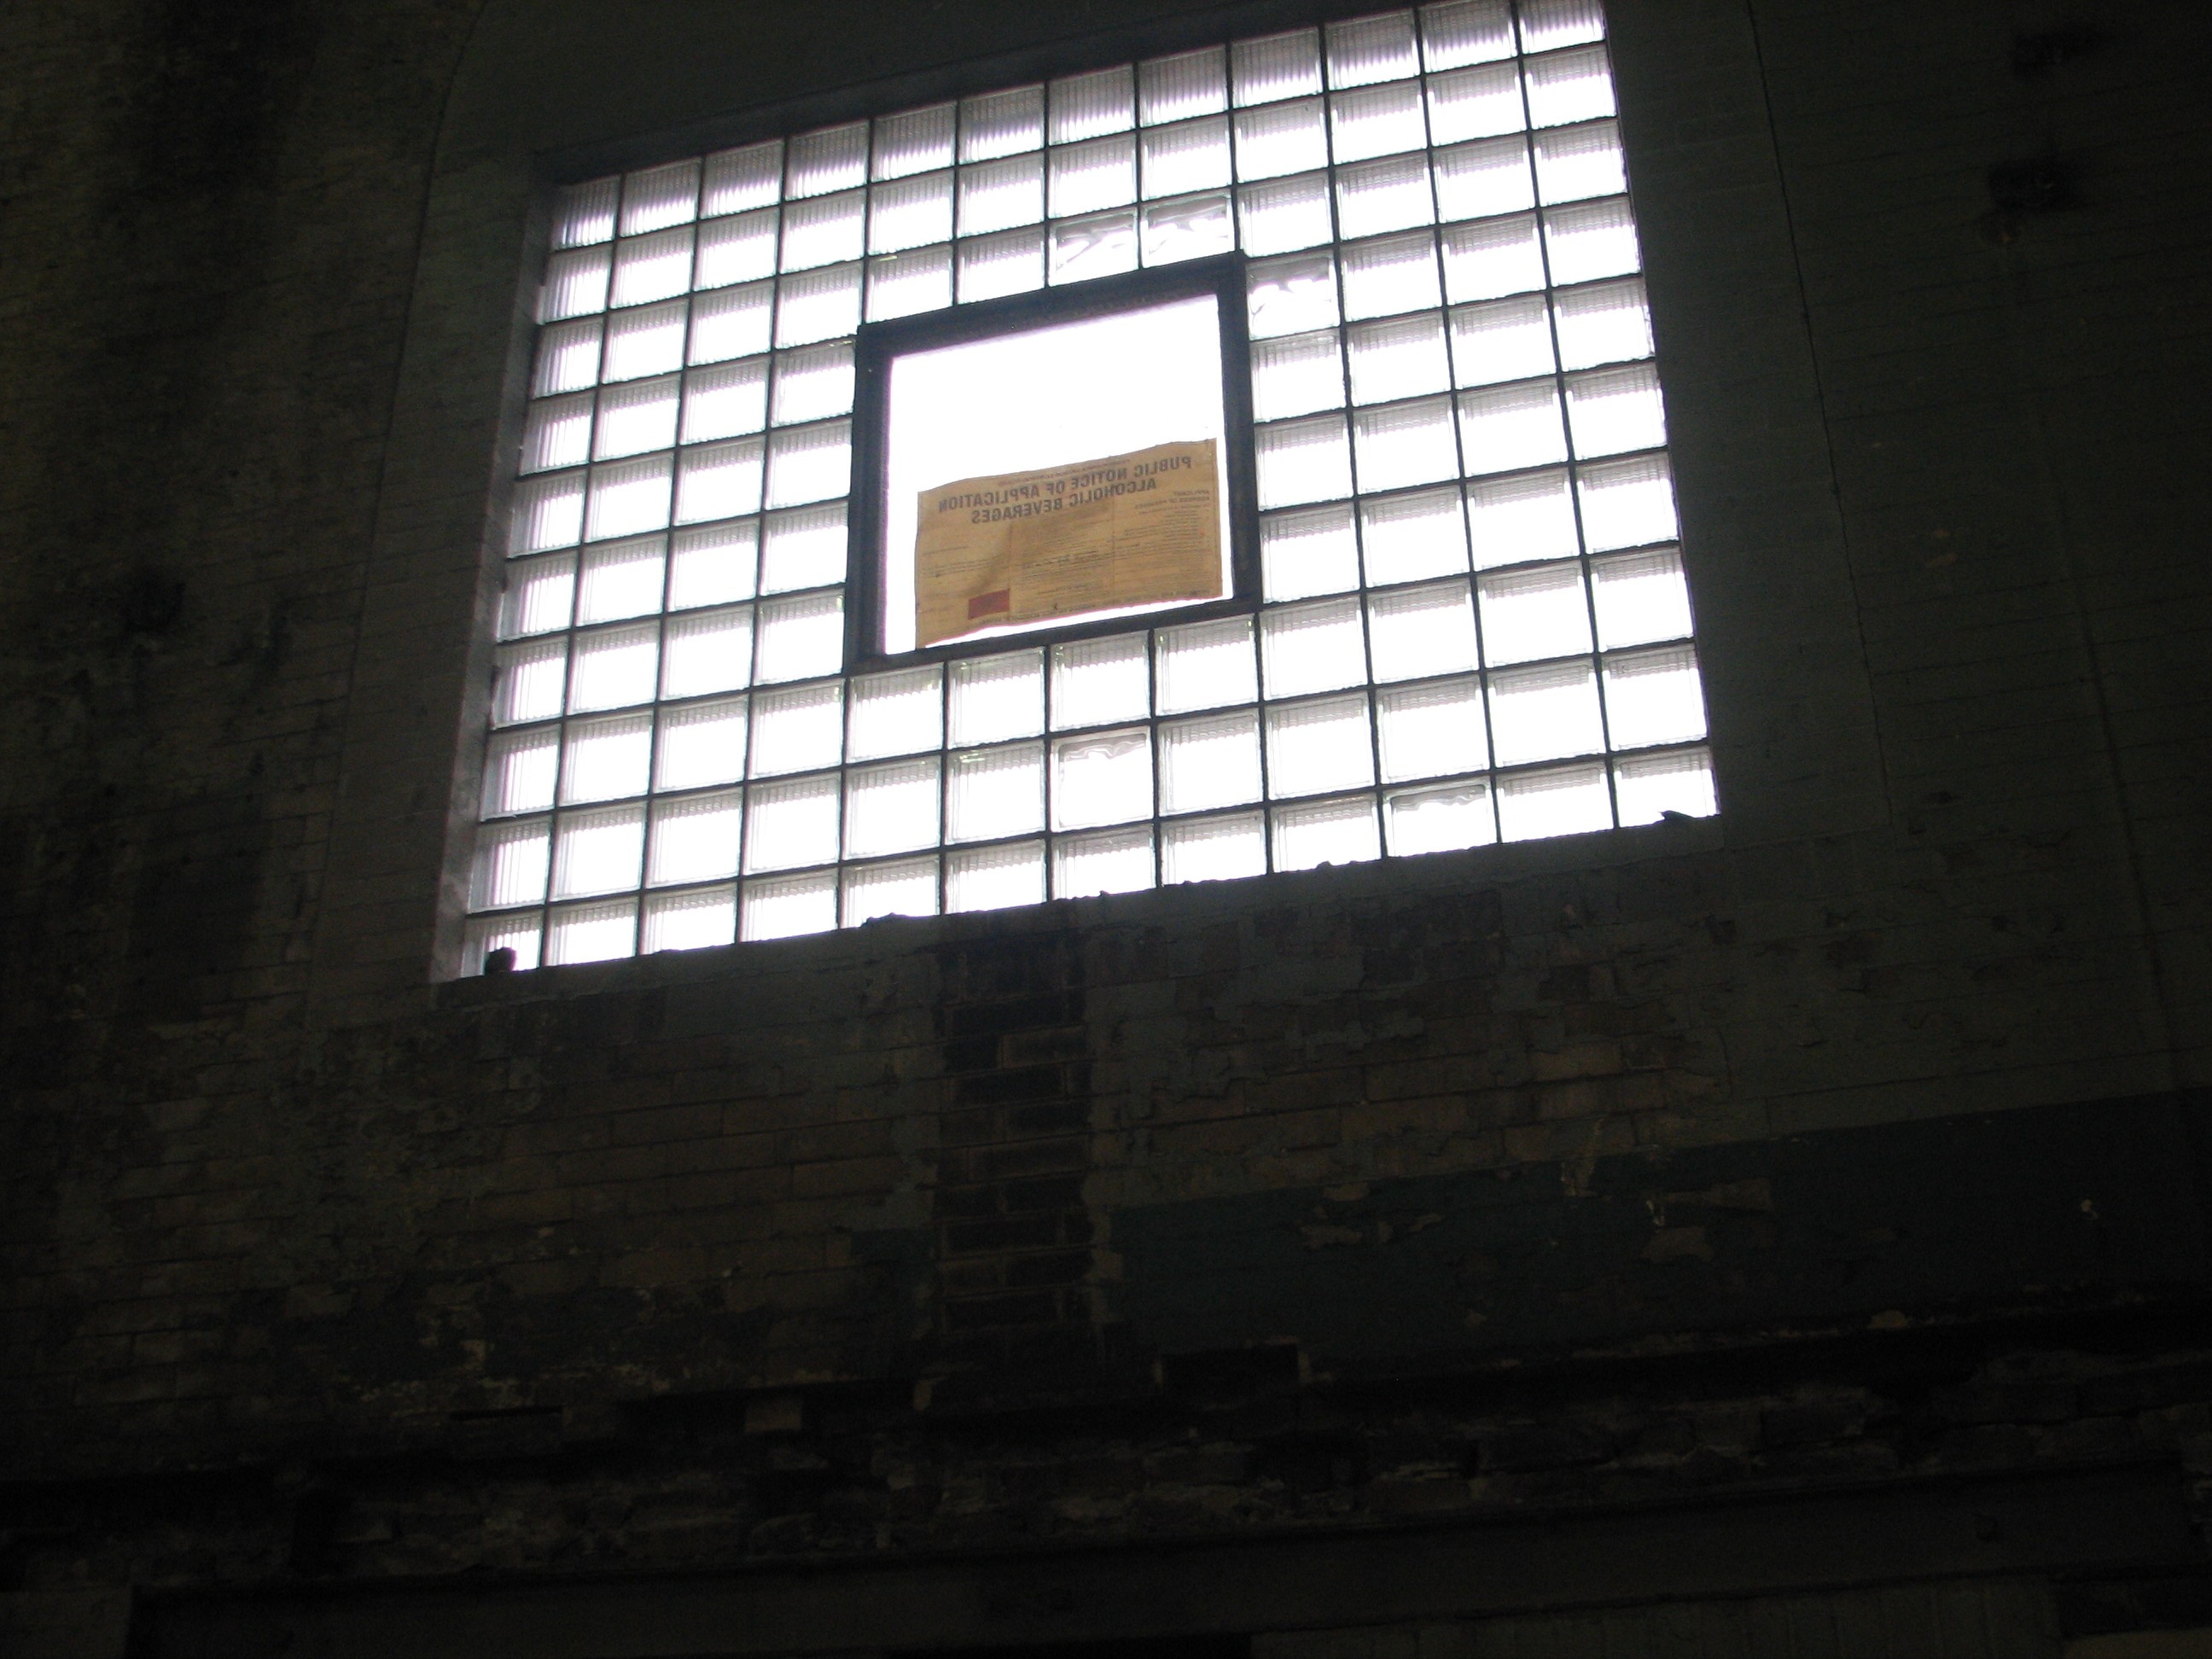 One of many large windows at the old pumping station. The glass block will be removed, along with brickwork, to restore the windows to their original size.  A liquor license application is visible in the window. Stuccio said the ability to have a bar/restaurant social space was part of the decision to buy this building.